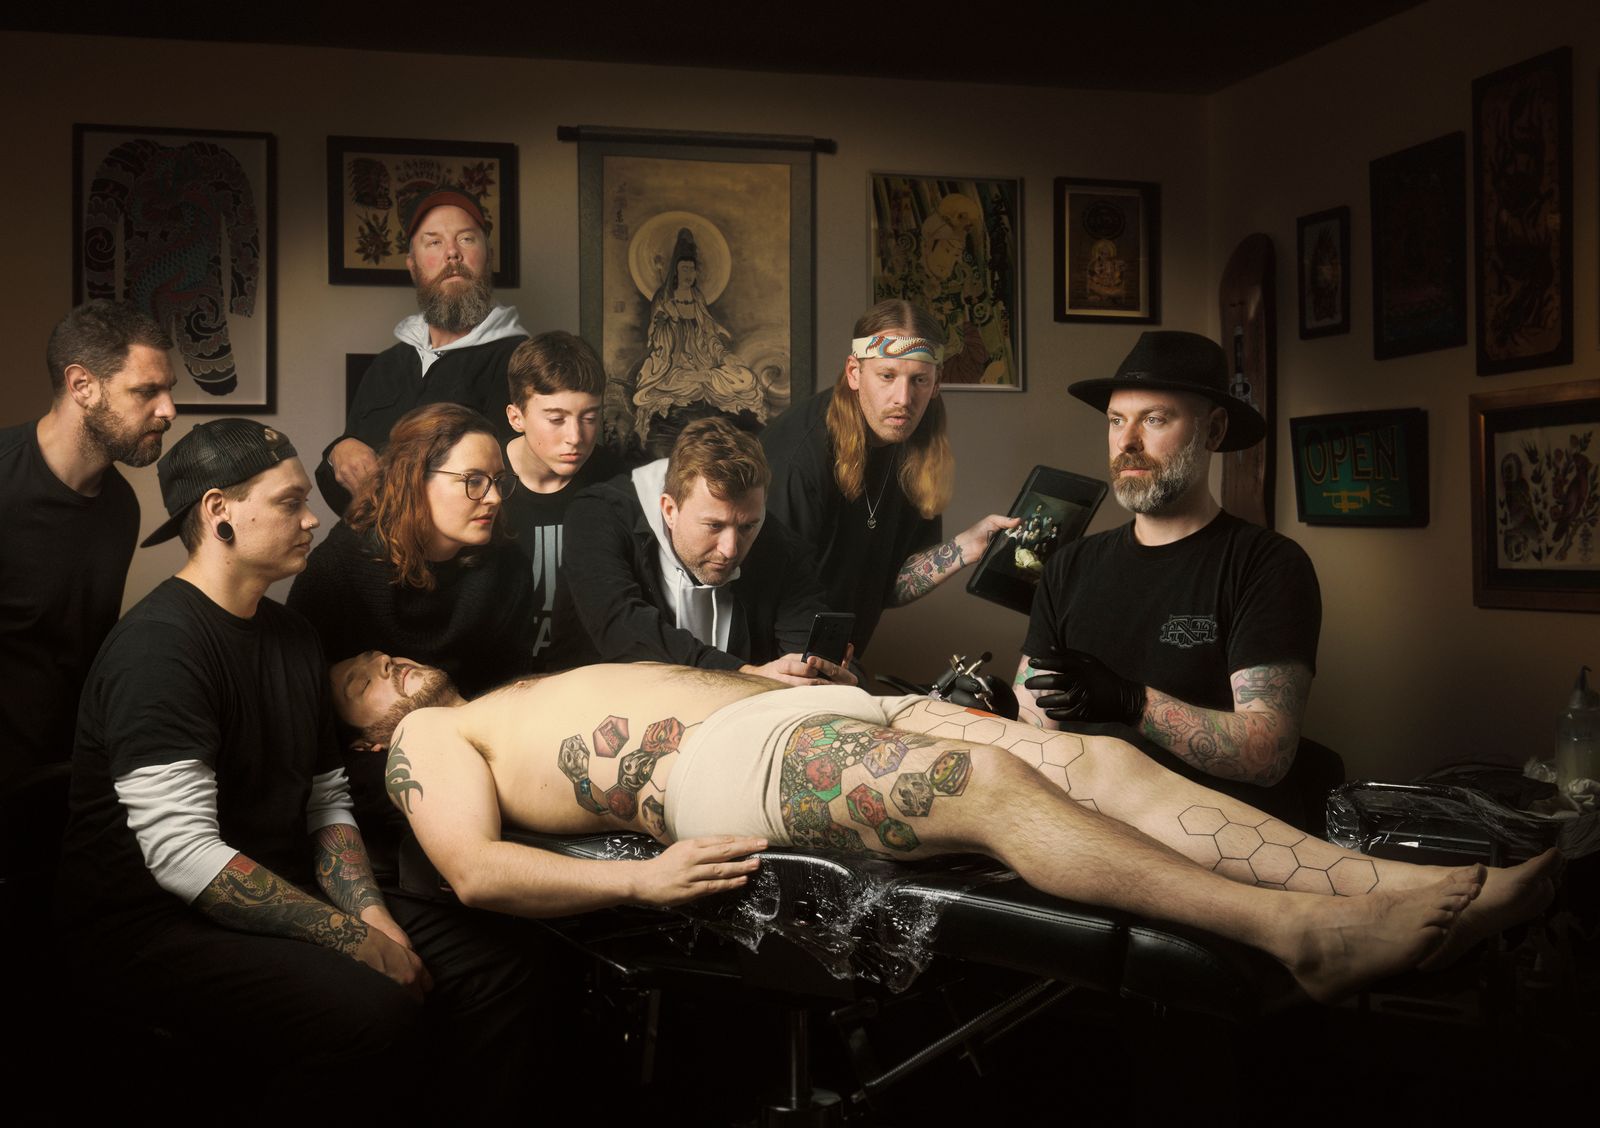 Rembrandt - The Anatomy Lesson of Dr. Nicolaes Tulp - 1632